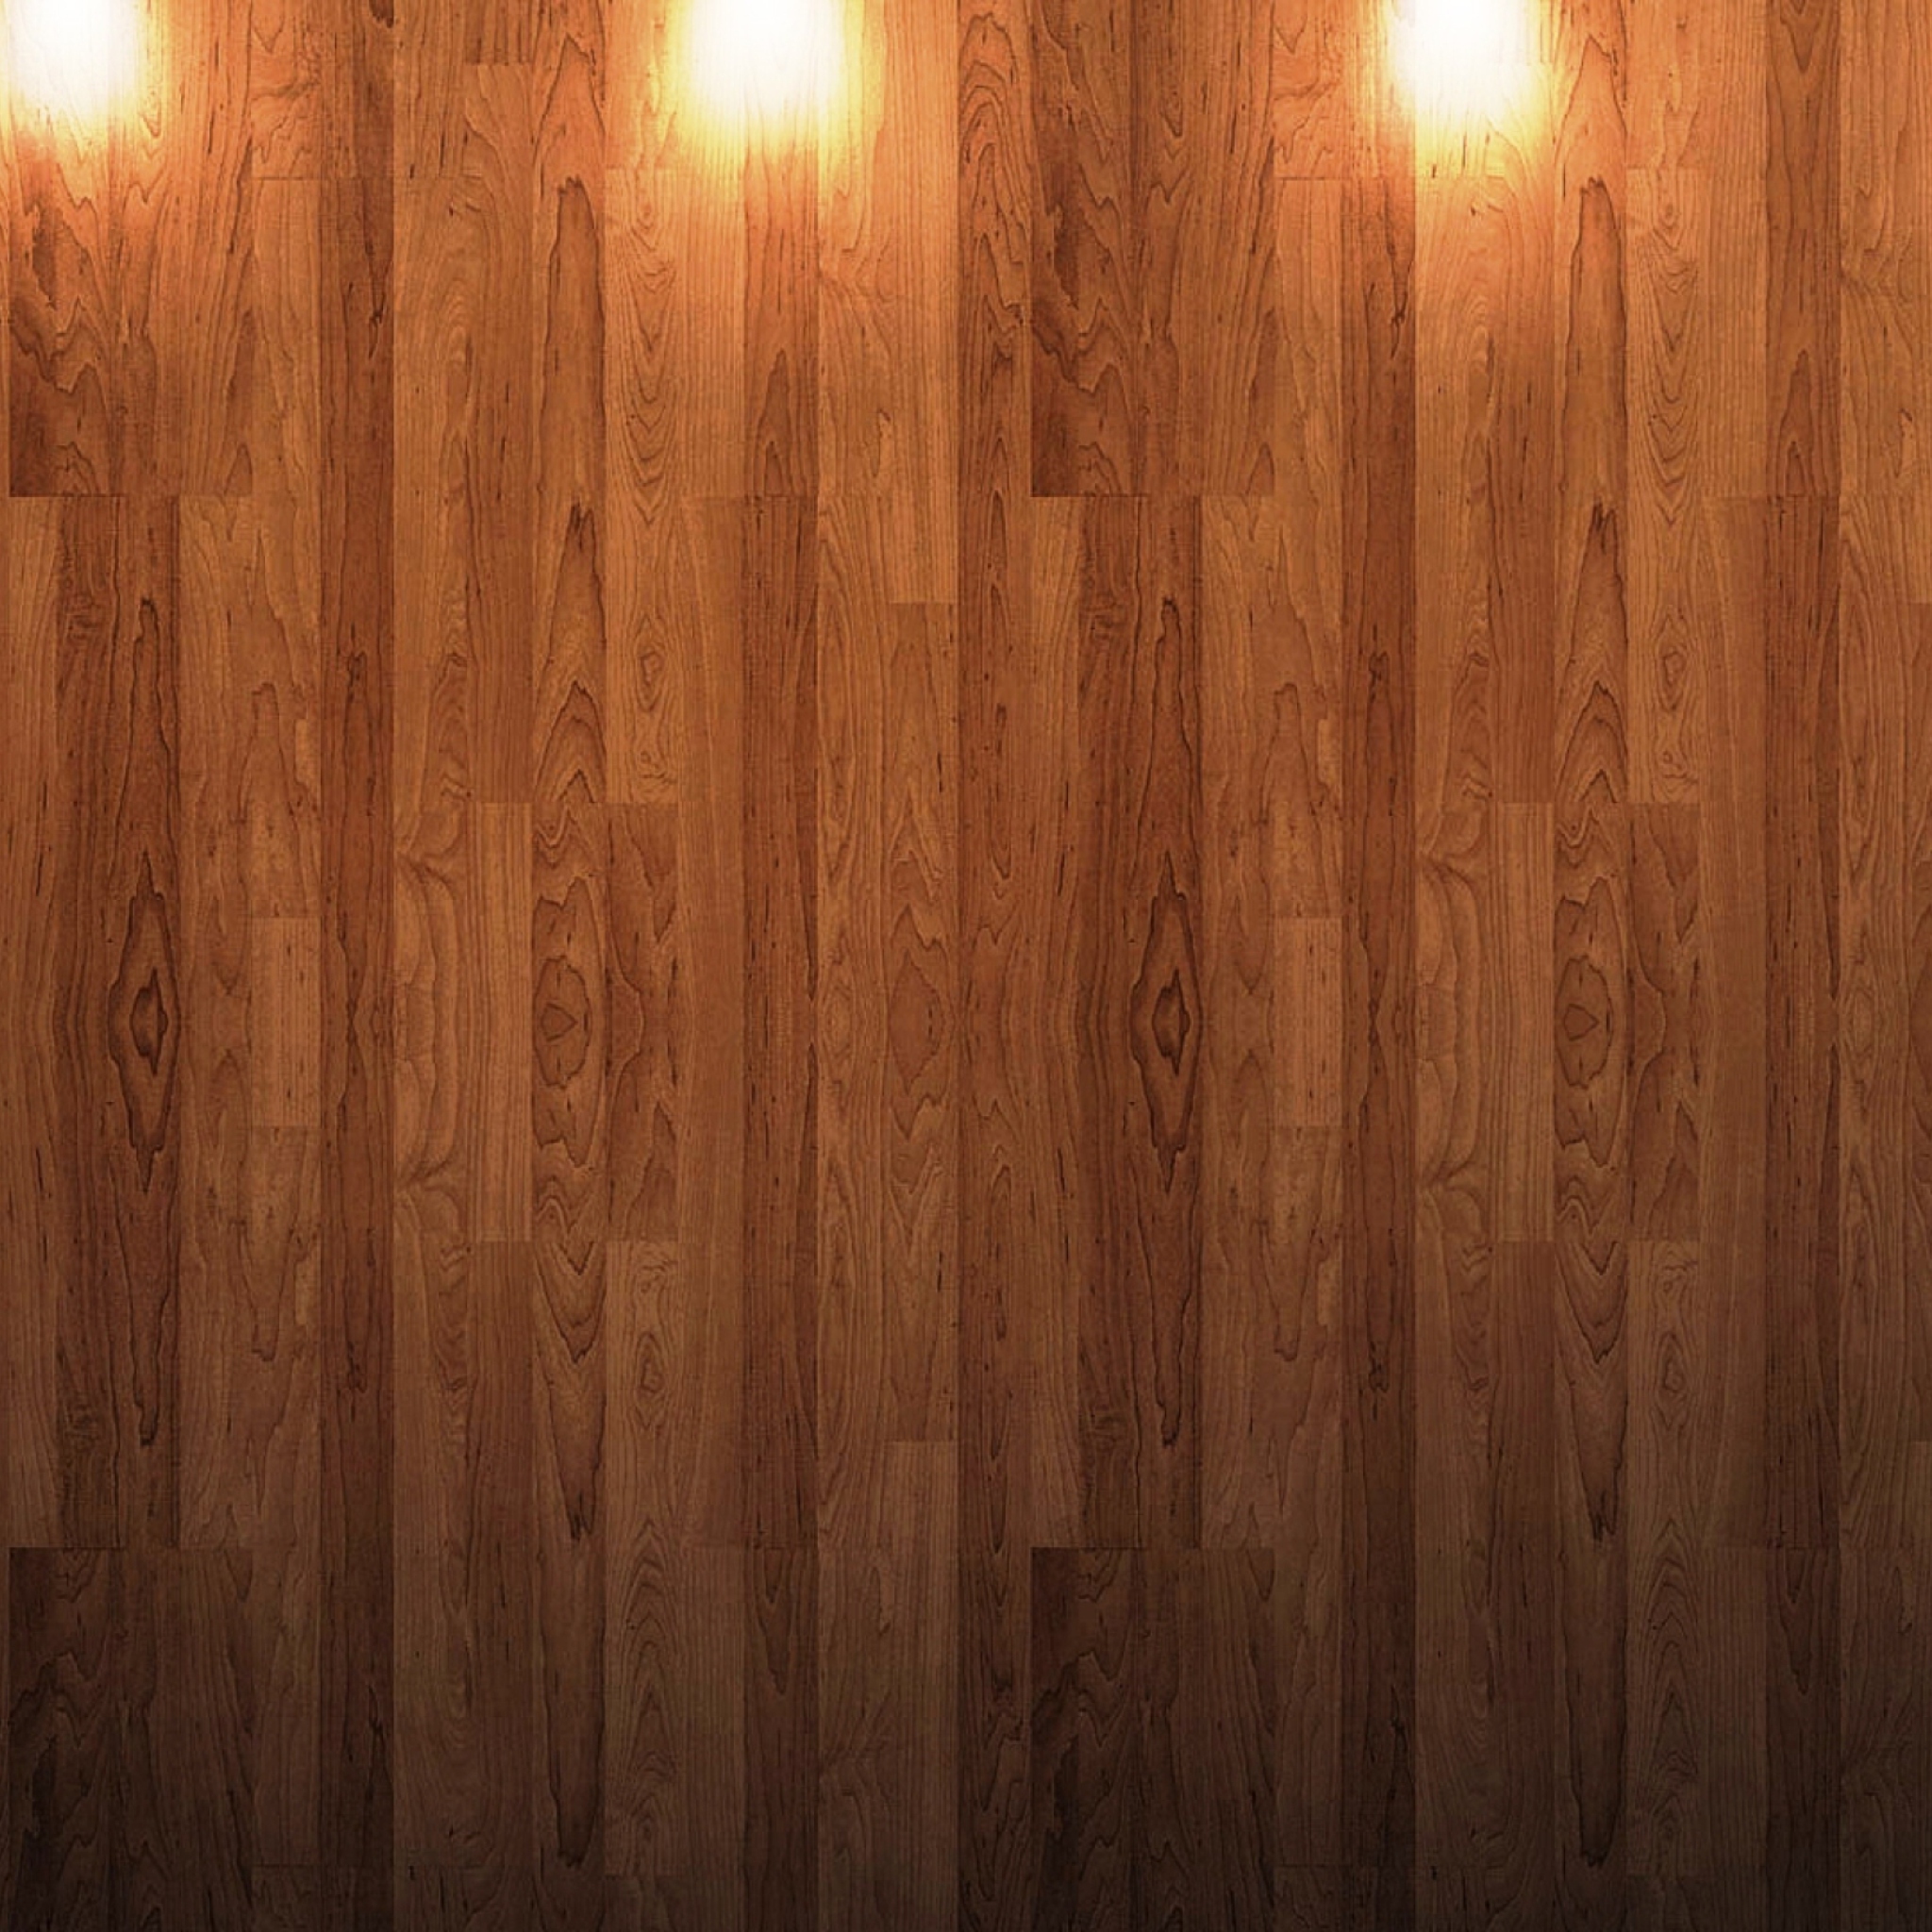 Das Simple and Beautifull Wood Texture Wallpaper 2048x2048